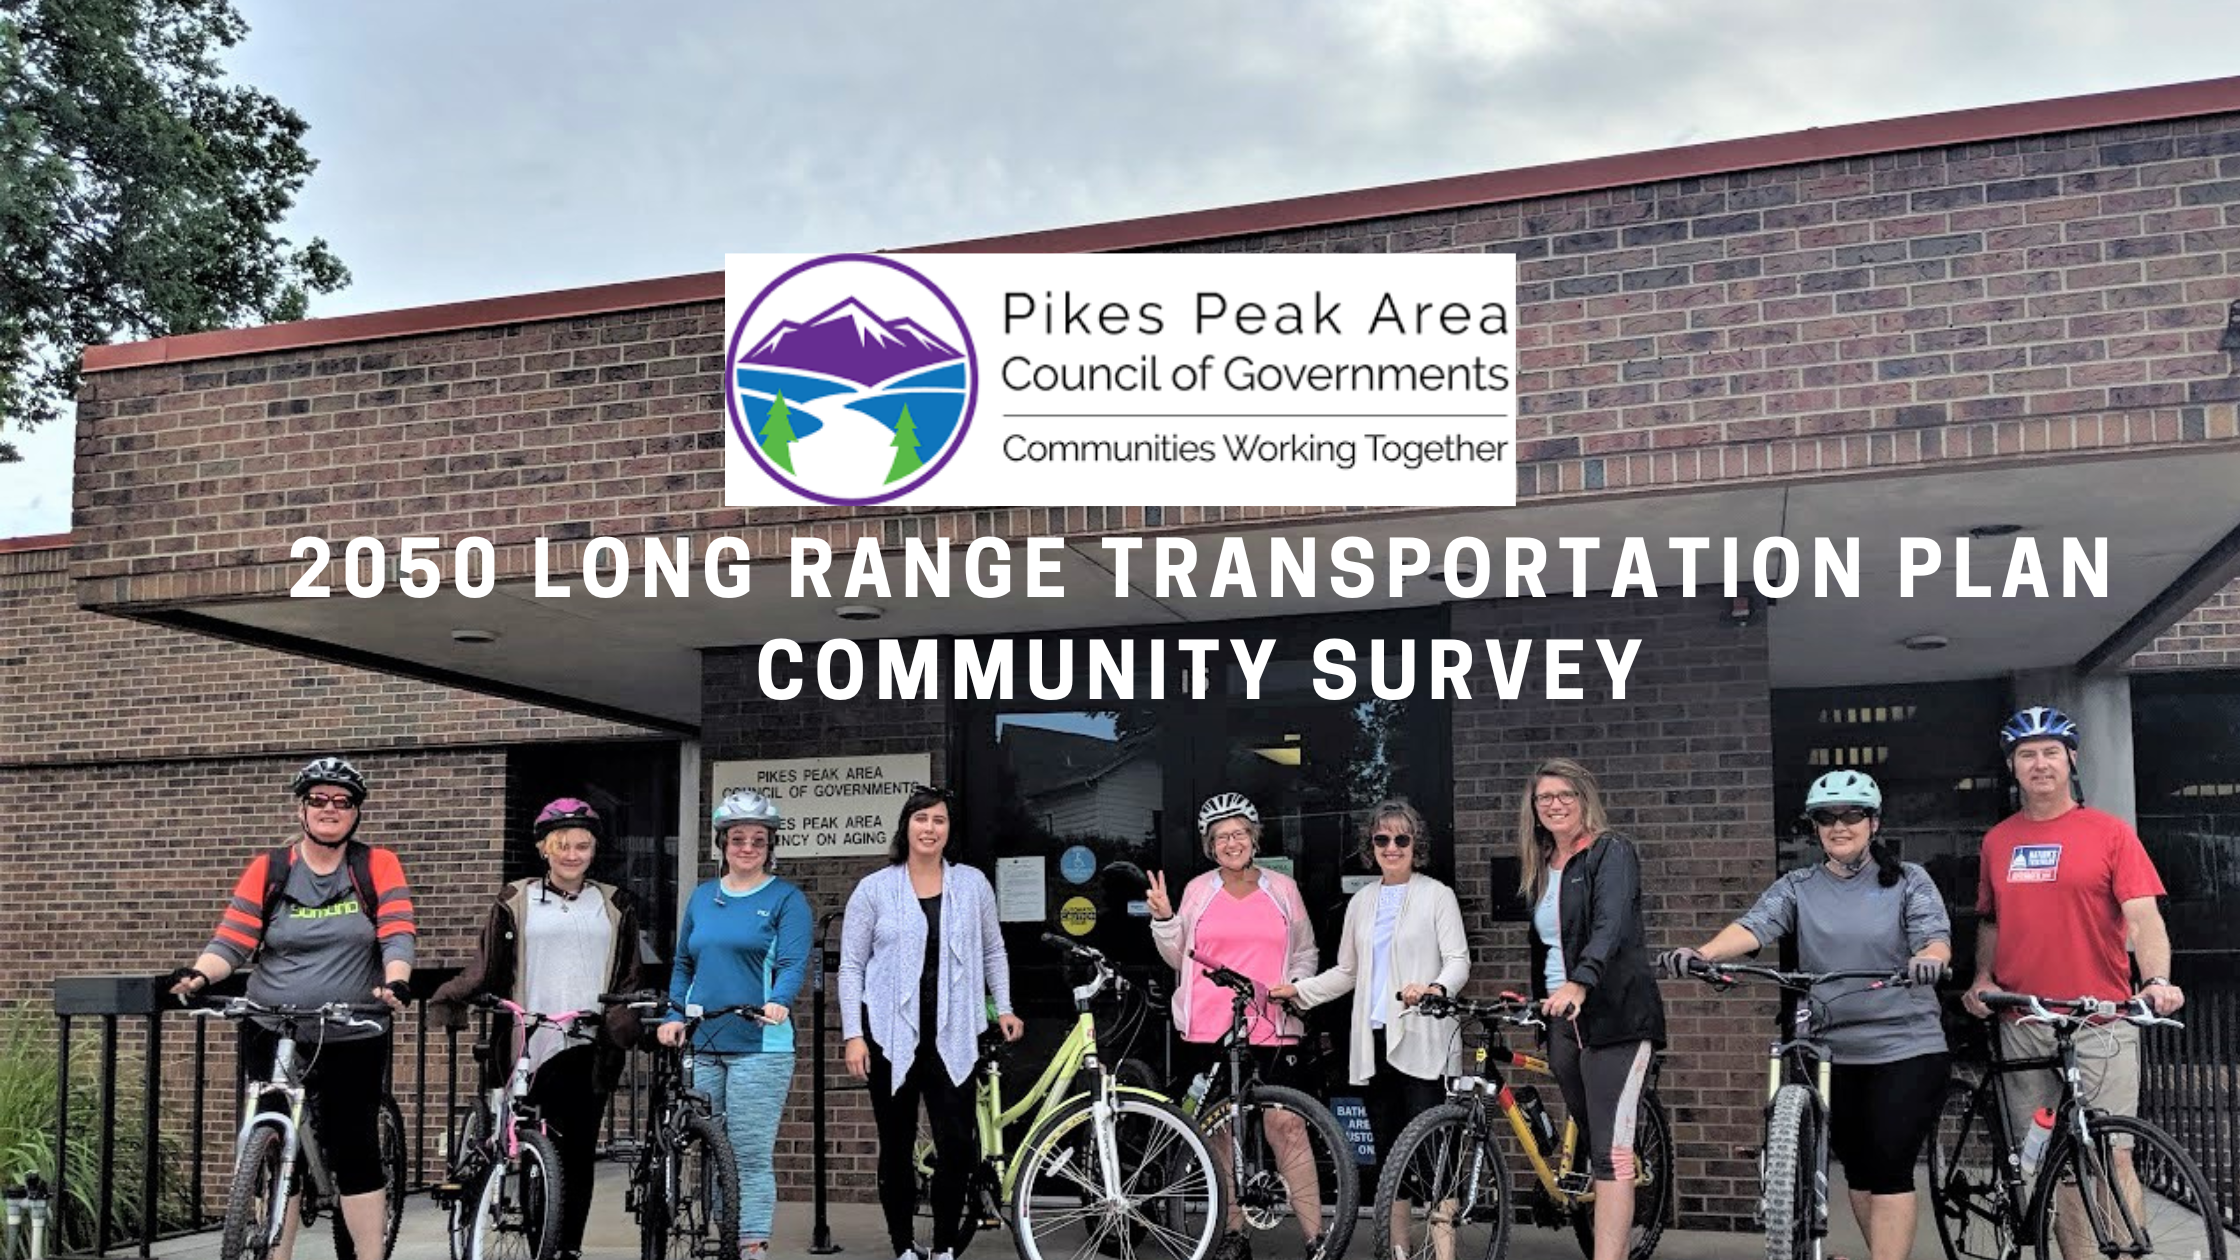 Take The PPACG 2050 Transportation Survey To Make Getting Around Our Region Better!